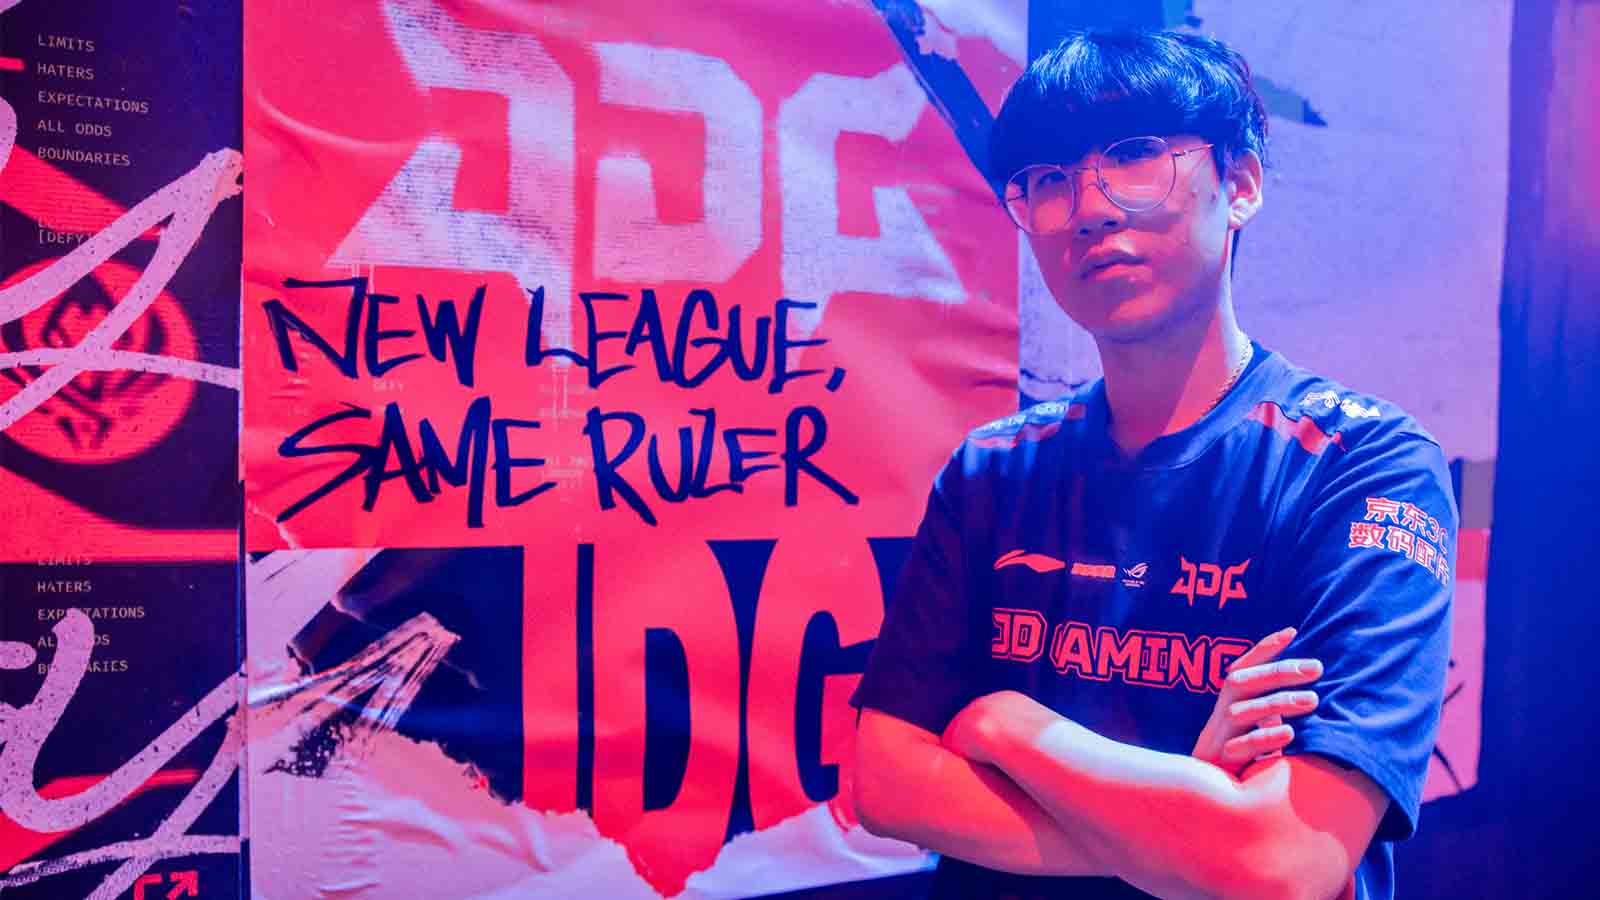 After MSI 2023, Ruler has now won every League of Legends esports title possible - ONE Esports